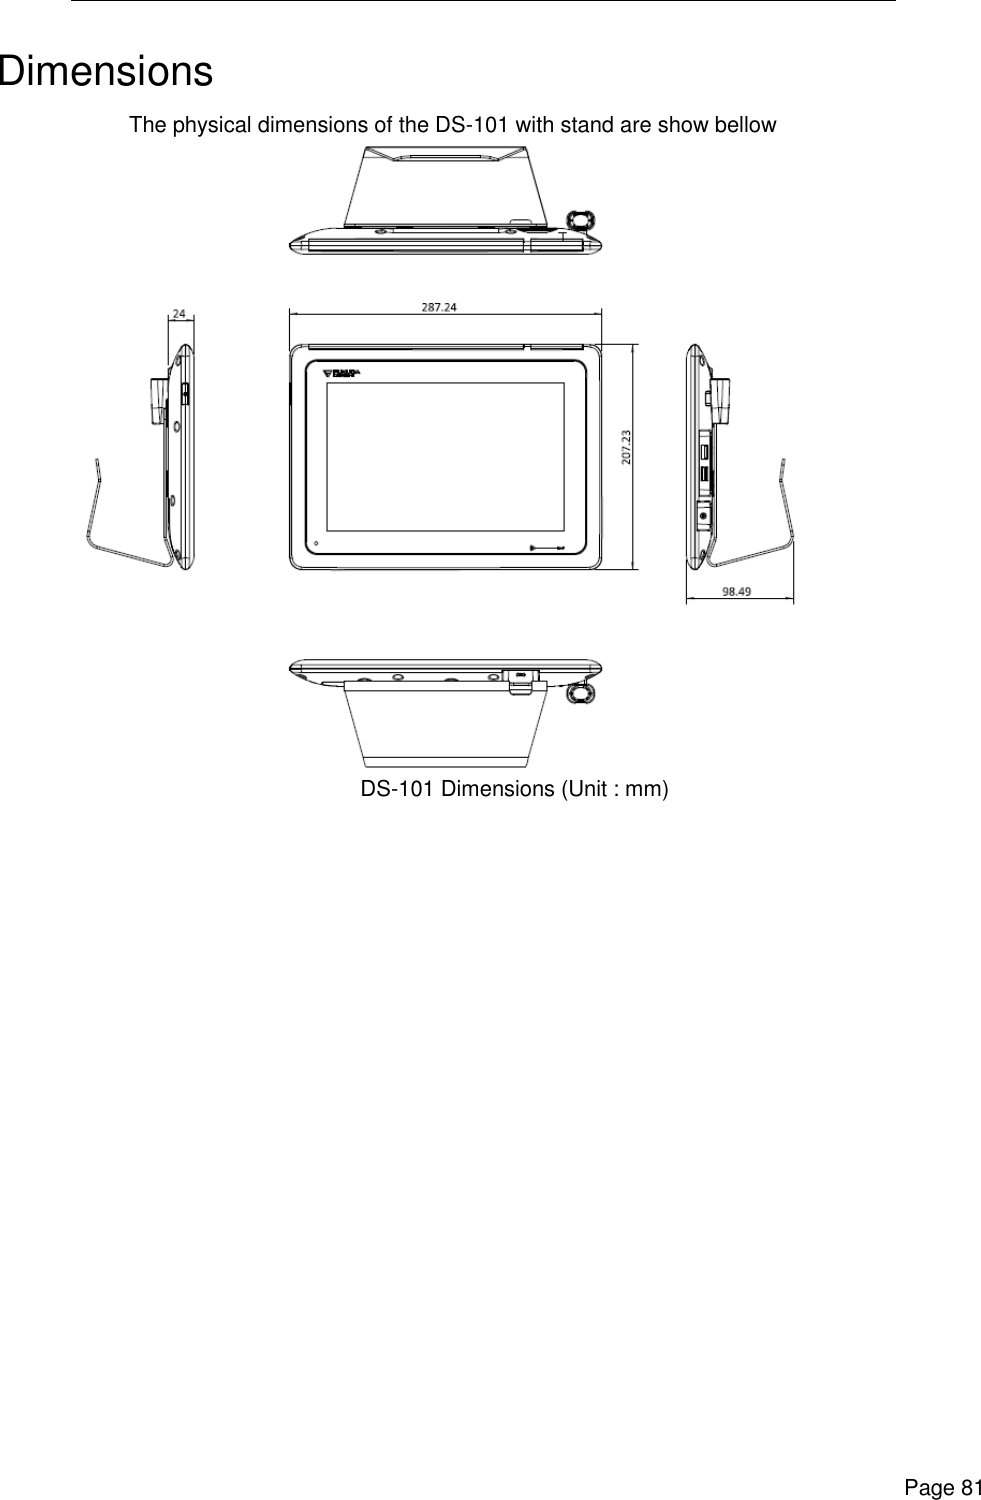      Page 81  Dimensions The physical dimensions of the DS-101 with stand are show bellow   DS-101 Dimensions (Unit : mm) 